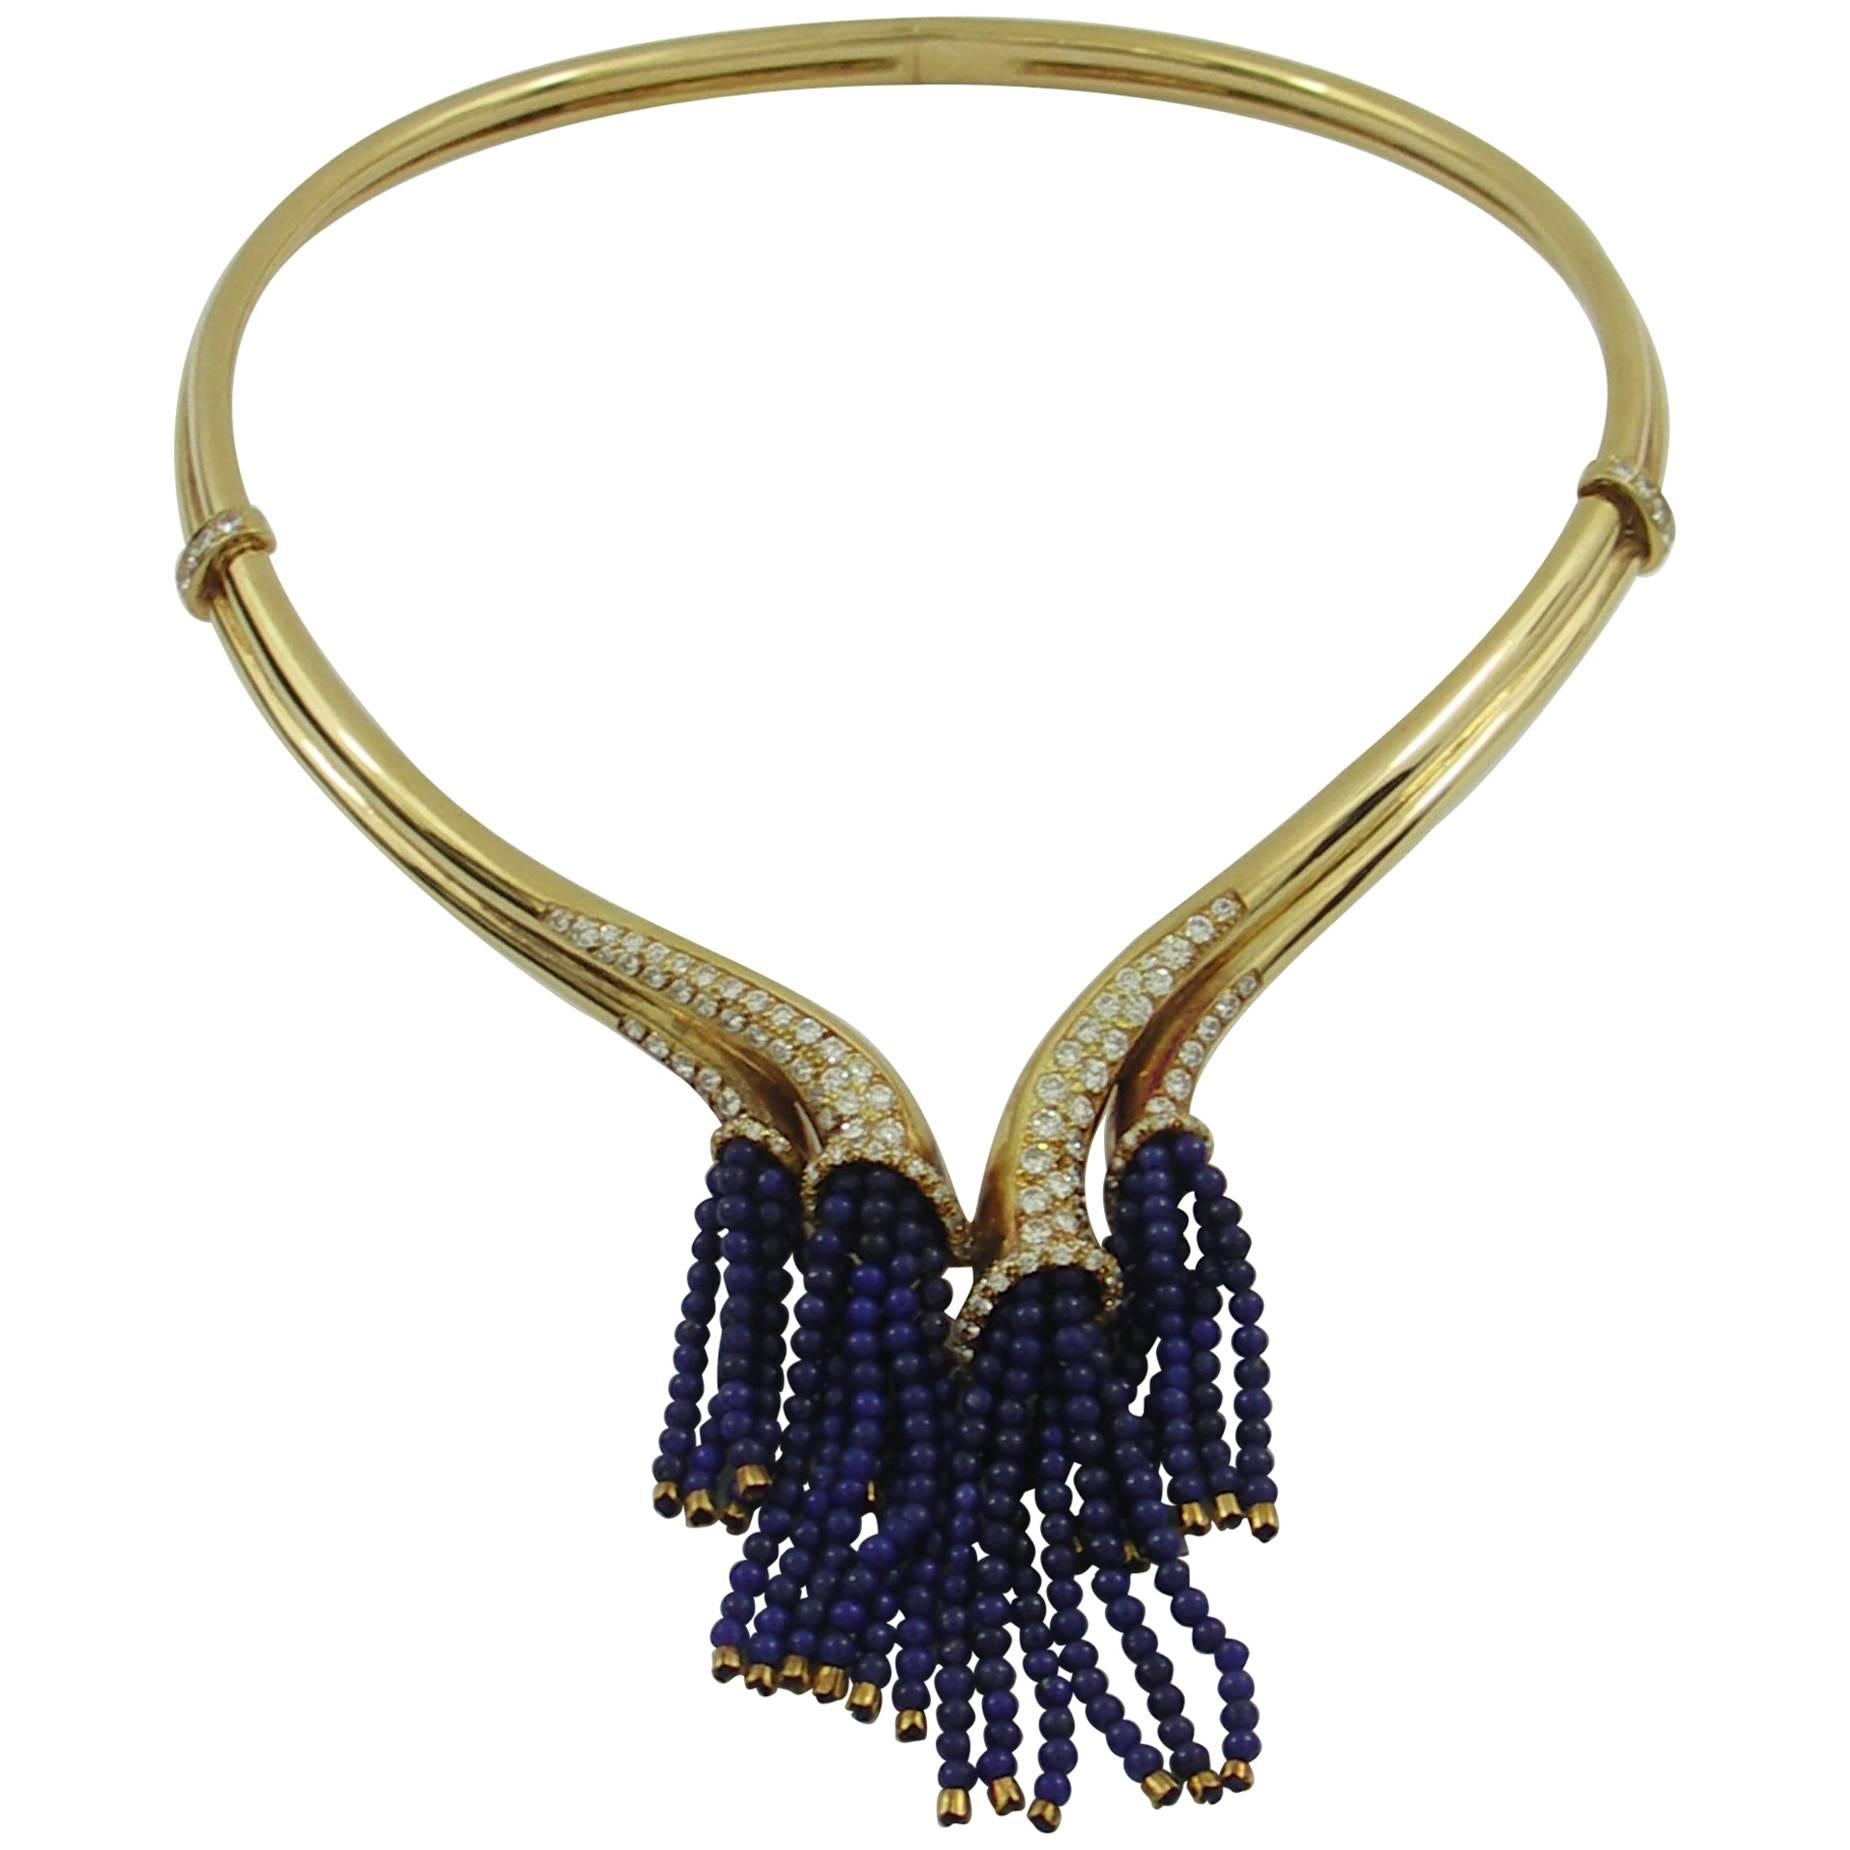 Gold Necklace with Diamonds and Lapis Bead Tassels